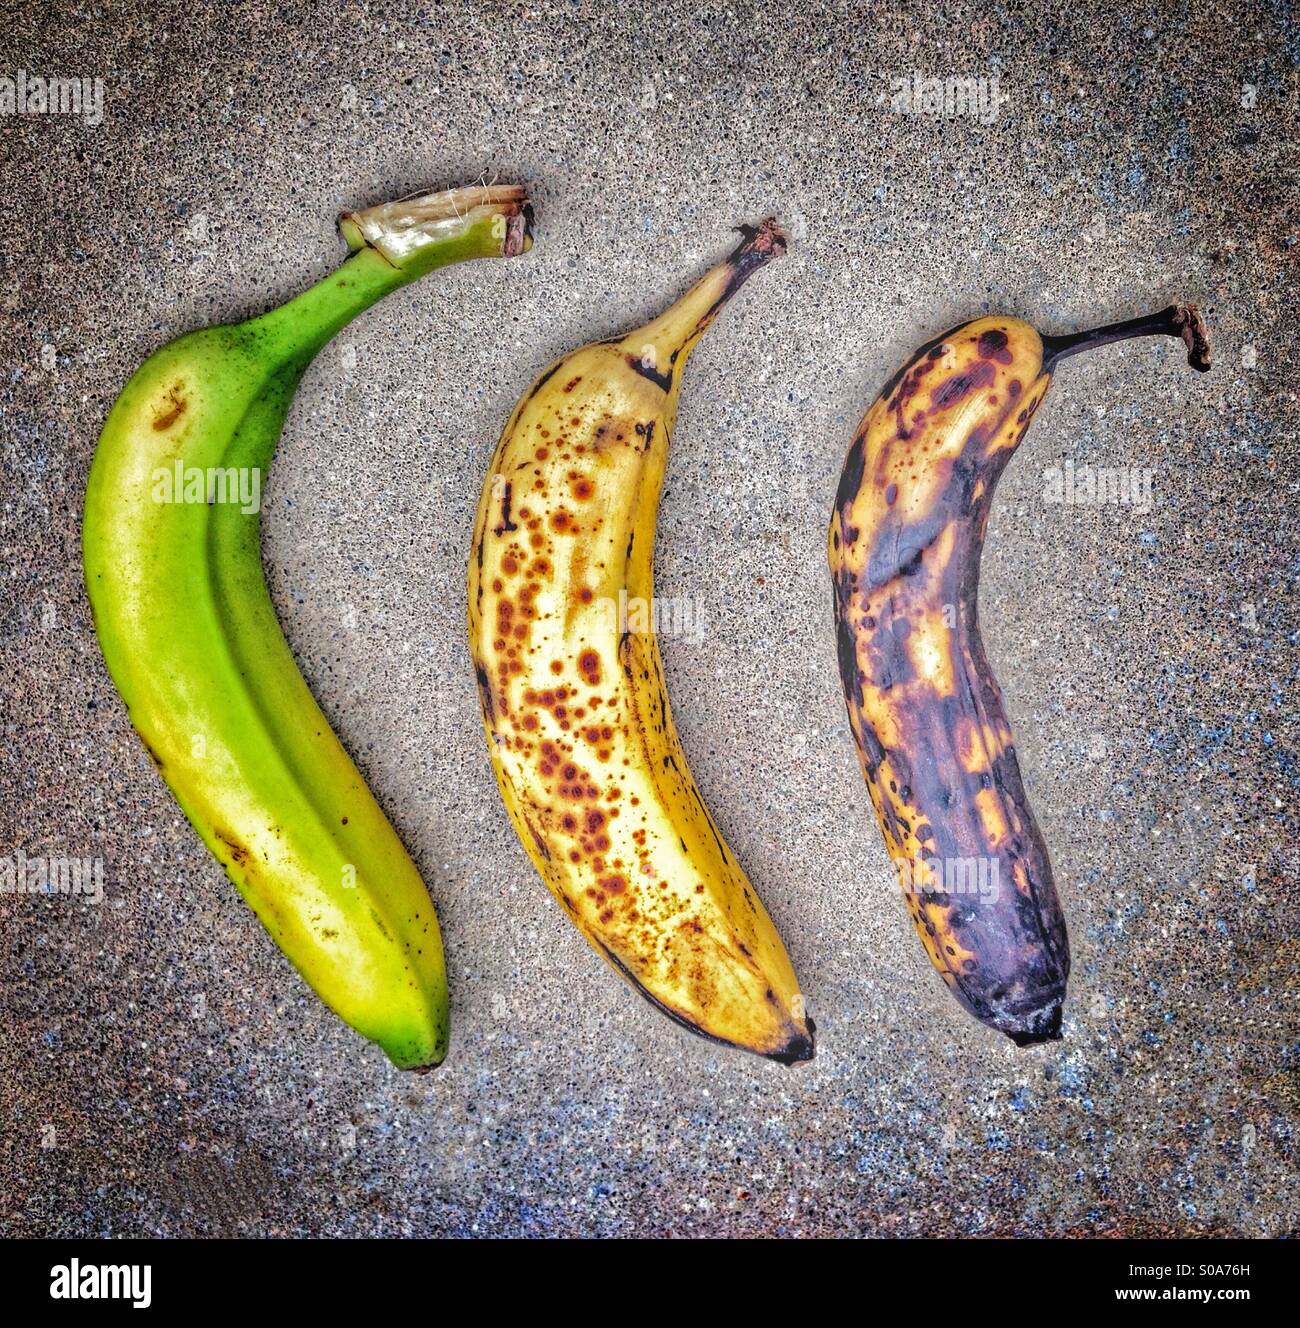 Stages Of A Banana, From Green To Ripe To Overripe Stock Photo